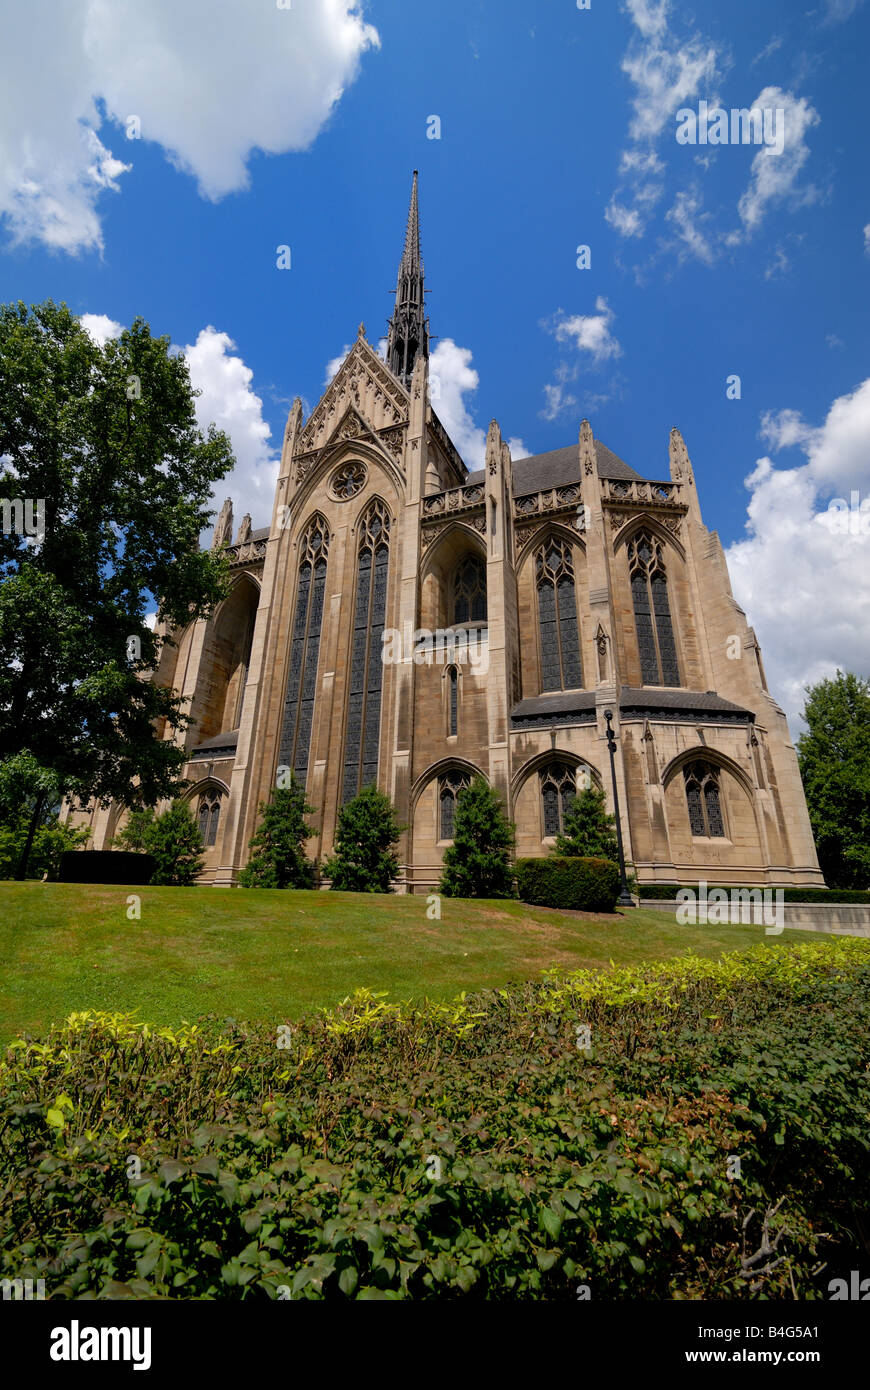 Heinz Chapel is an interdenominational church located in the Oakland section of Pittsburgh Pennsylvania. Stock Photo